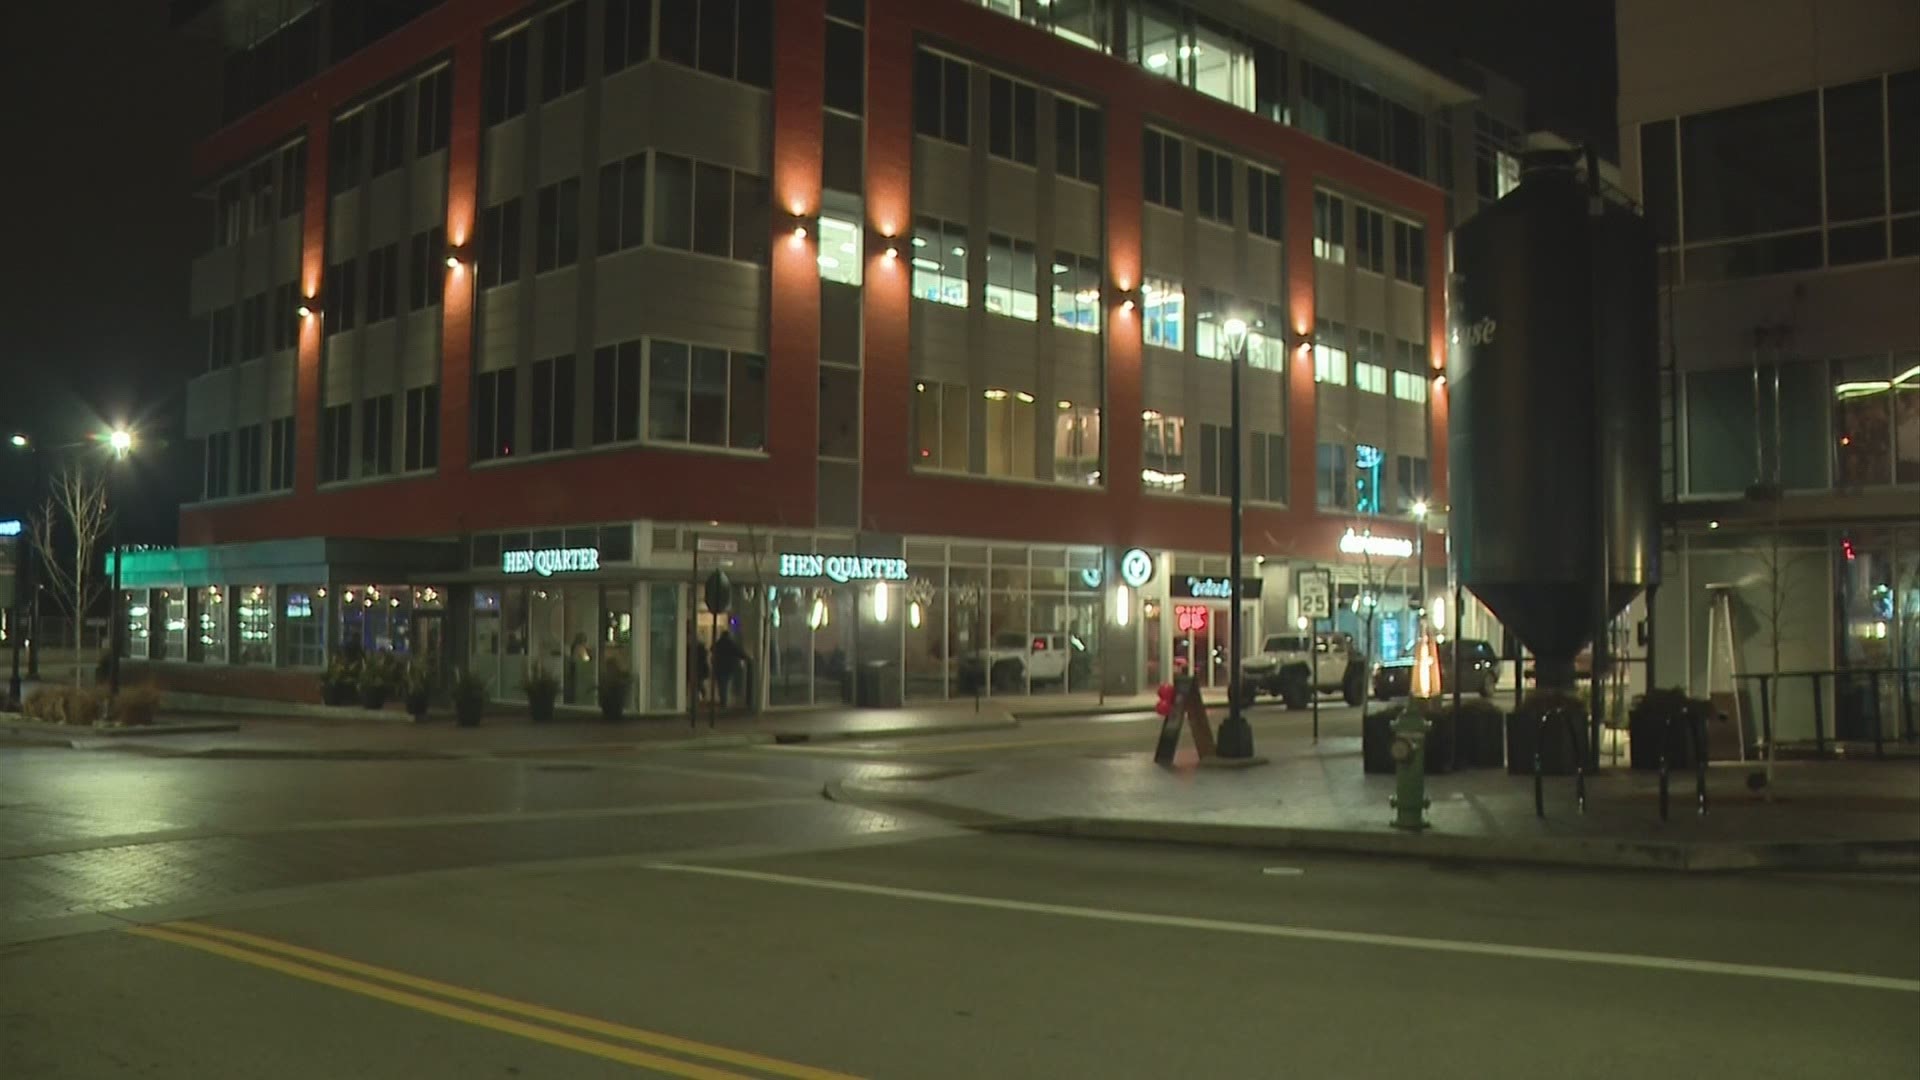 Restaurant and bar owners are cautiously optimistic about the loosening of the curfew.